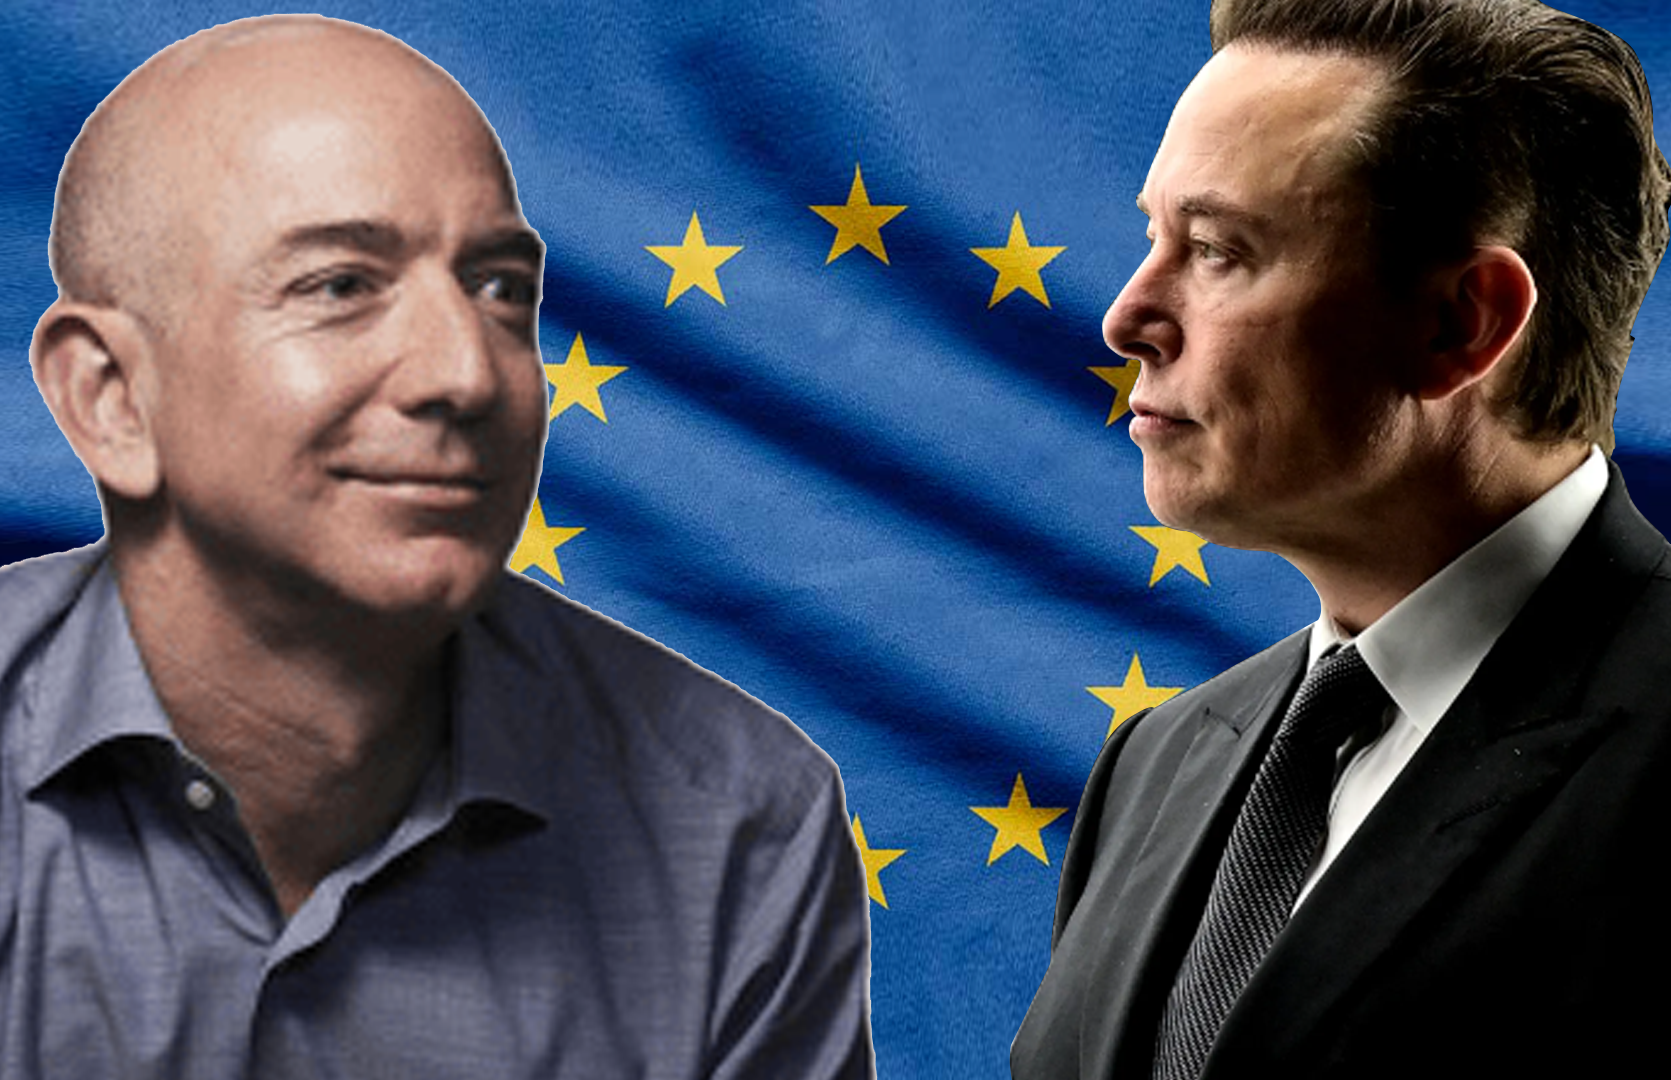 EU Tax Observatory proposes a 2% global tax on the world’s billionaires